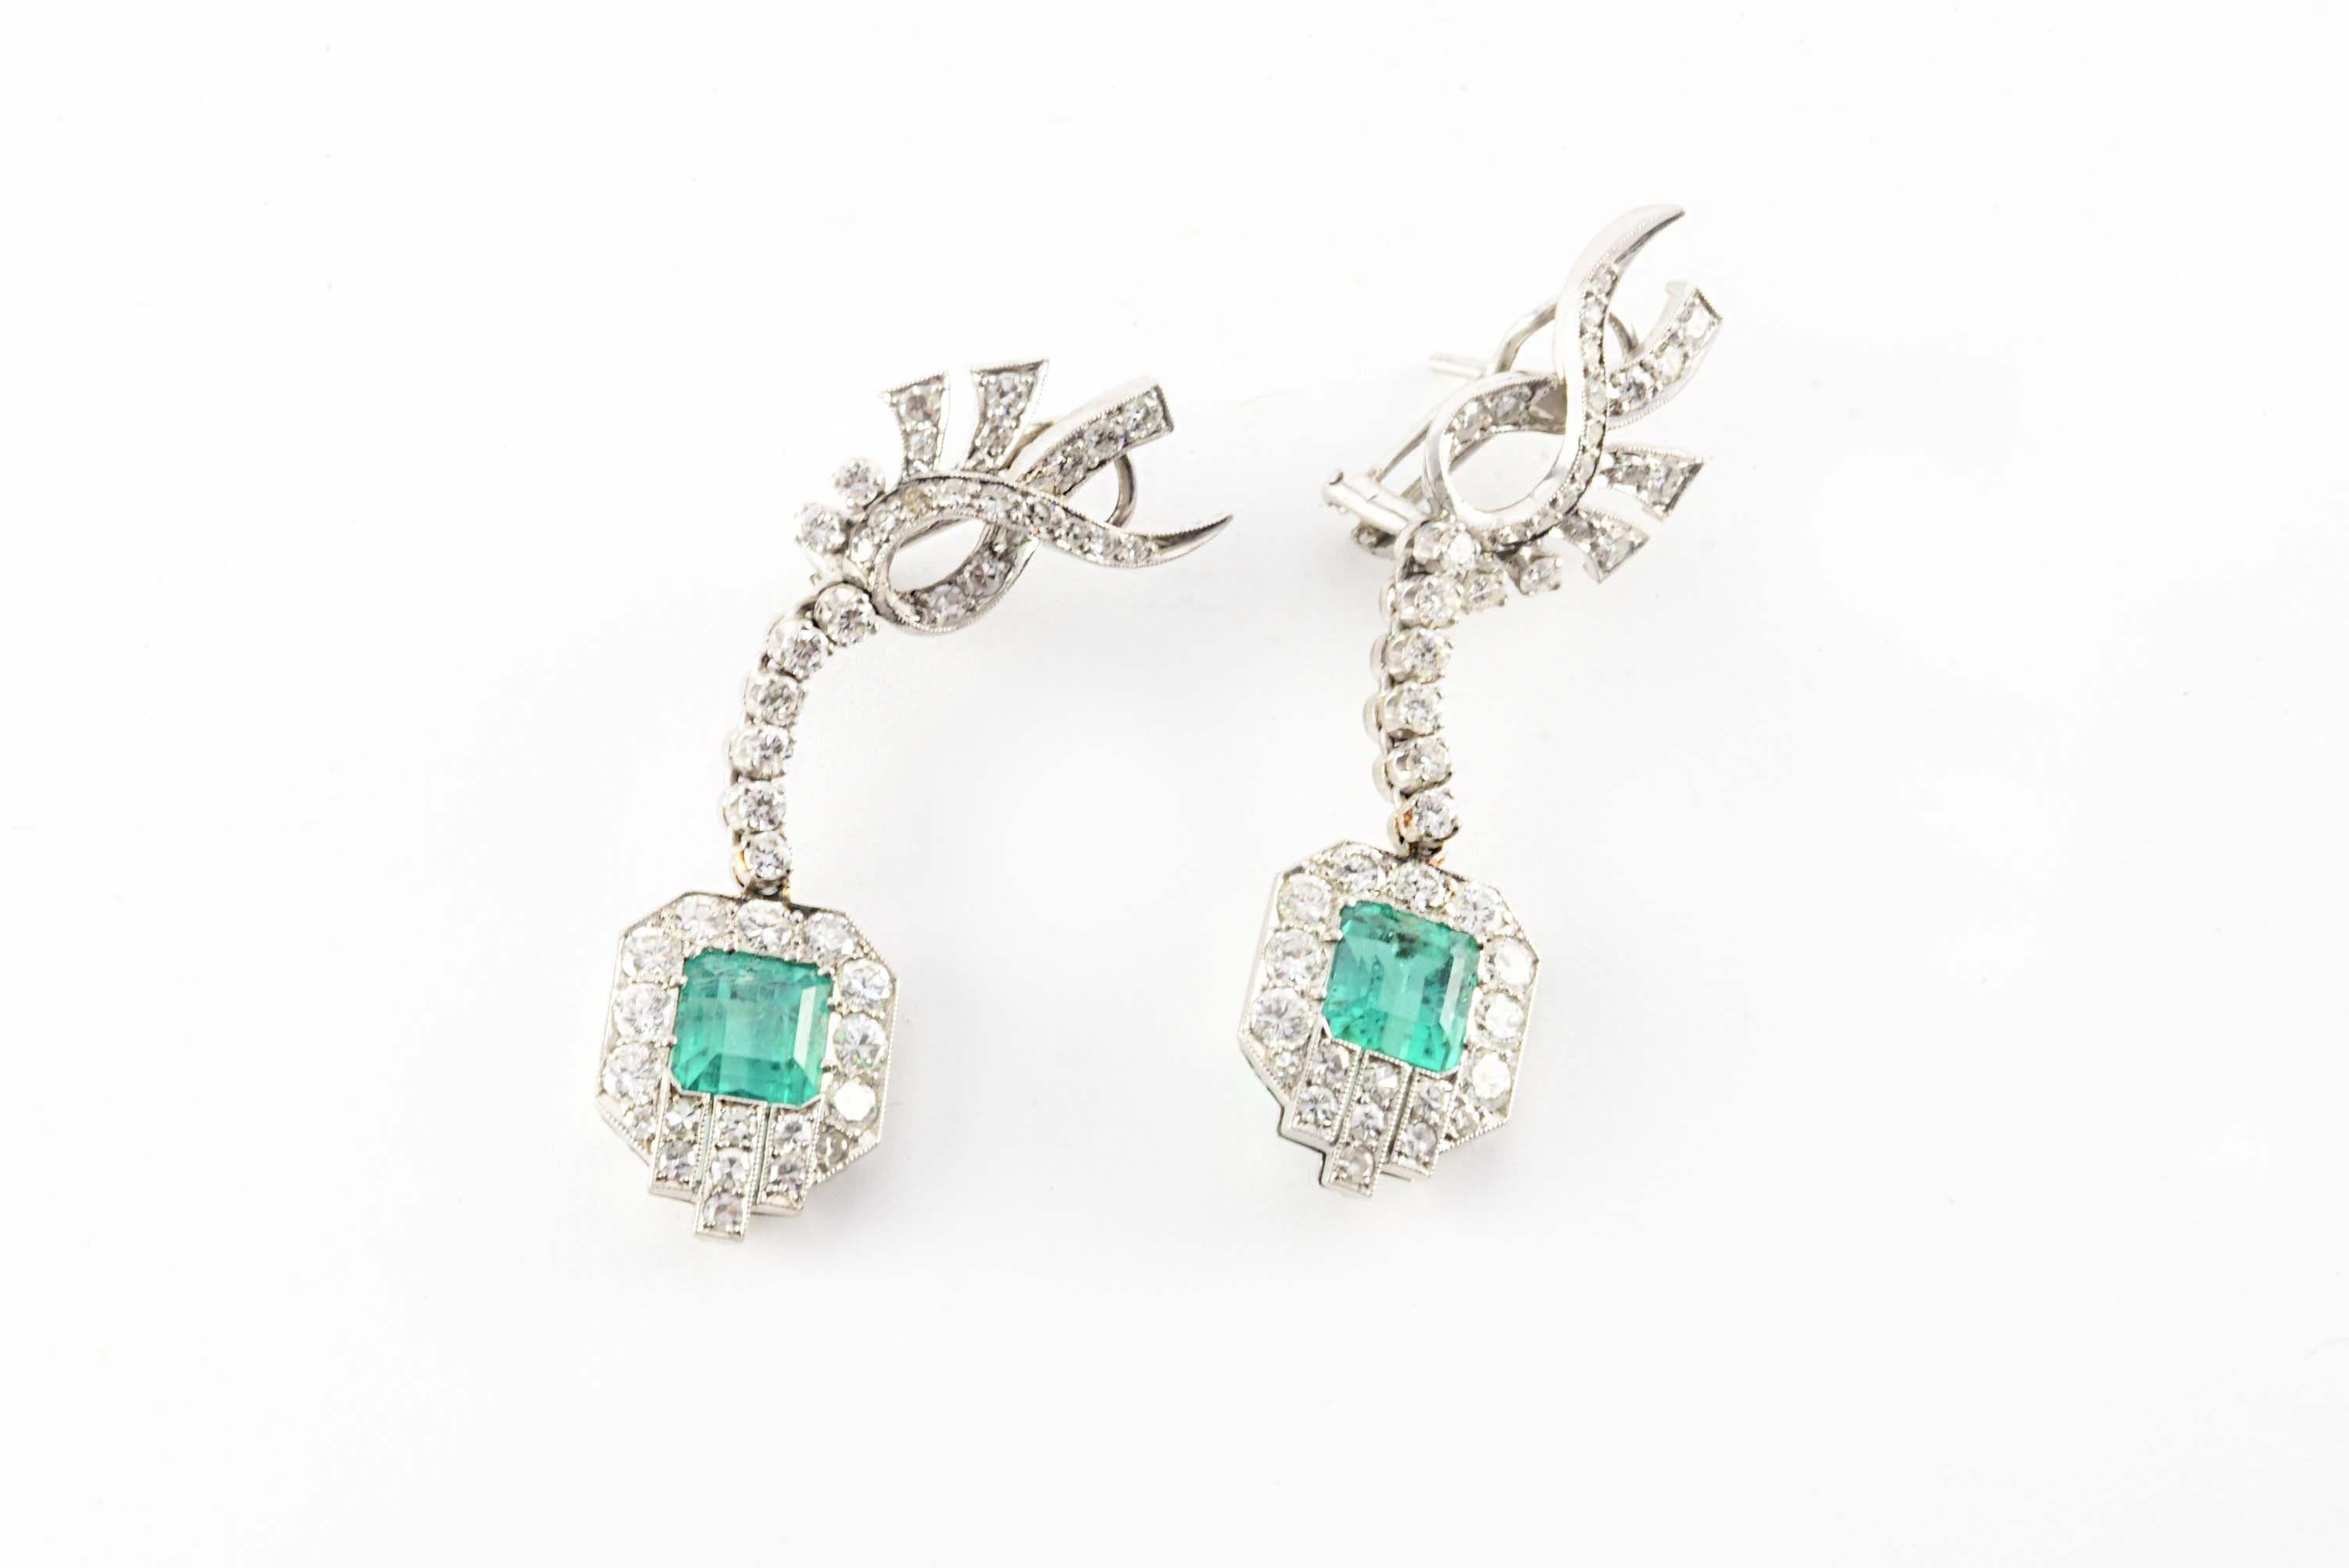 A mix of icy white single cut and Old European cut diamonds, G-H color, VS-SI clarity, totaling approximately 2.00 carats adorn these dazzling Art Deco drop down earrings designed around two square-shaped emerald-cut vibrant green Colombian emeralds